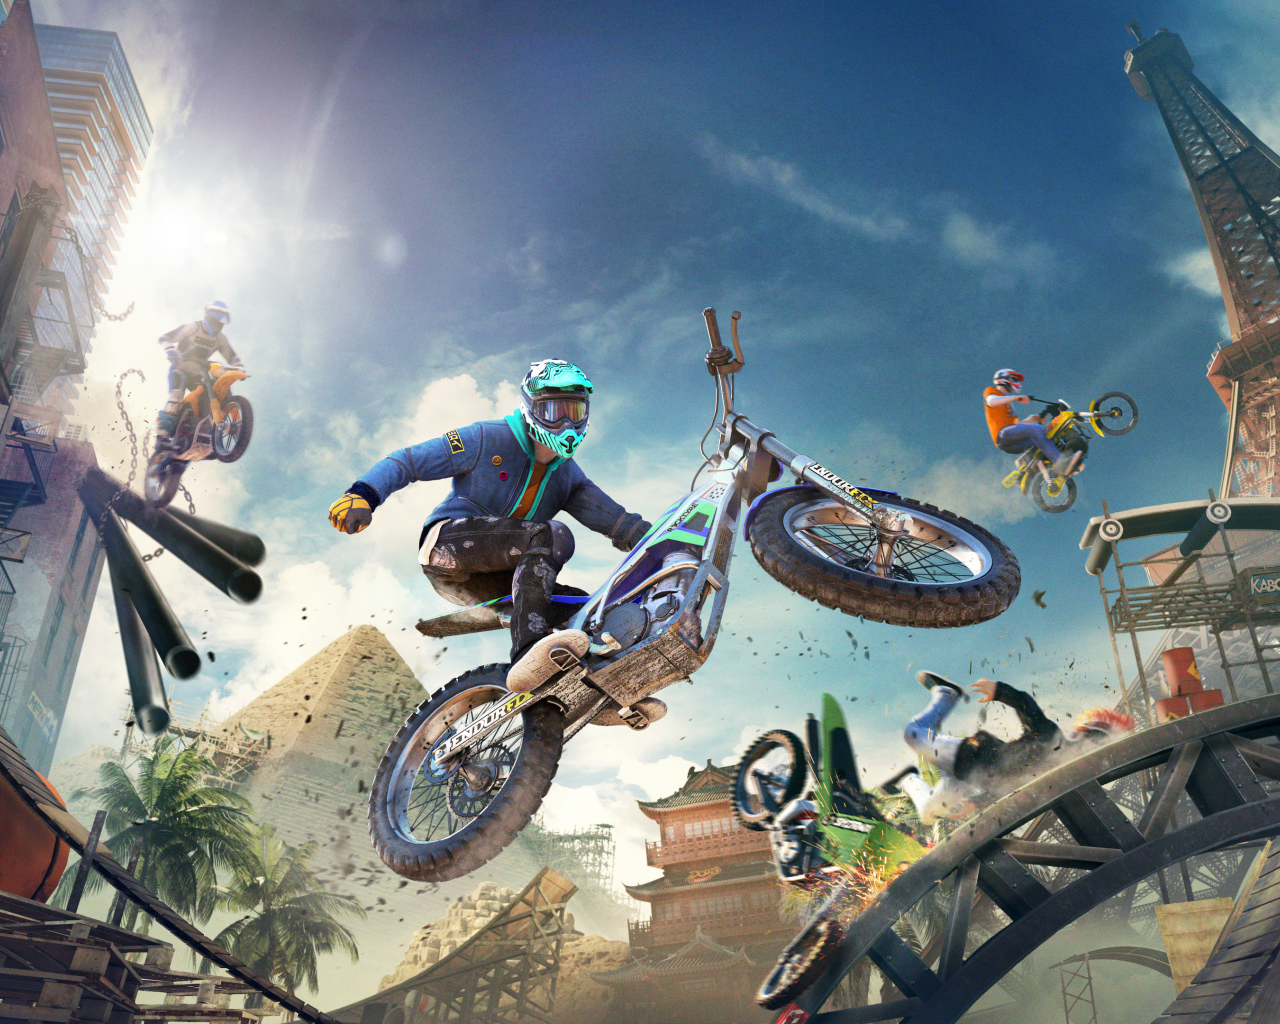 Poster of the new racing game Trials Rising, 2019